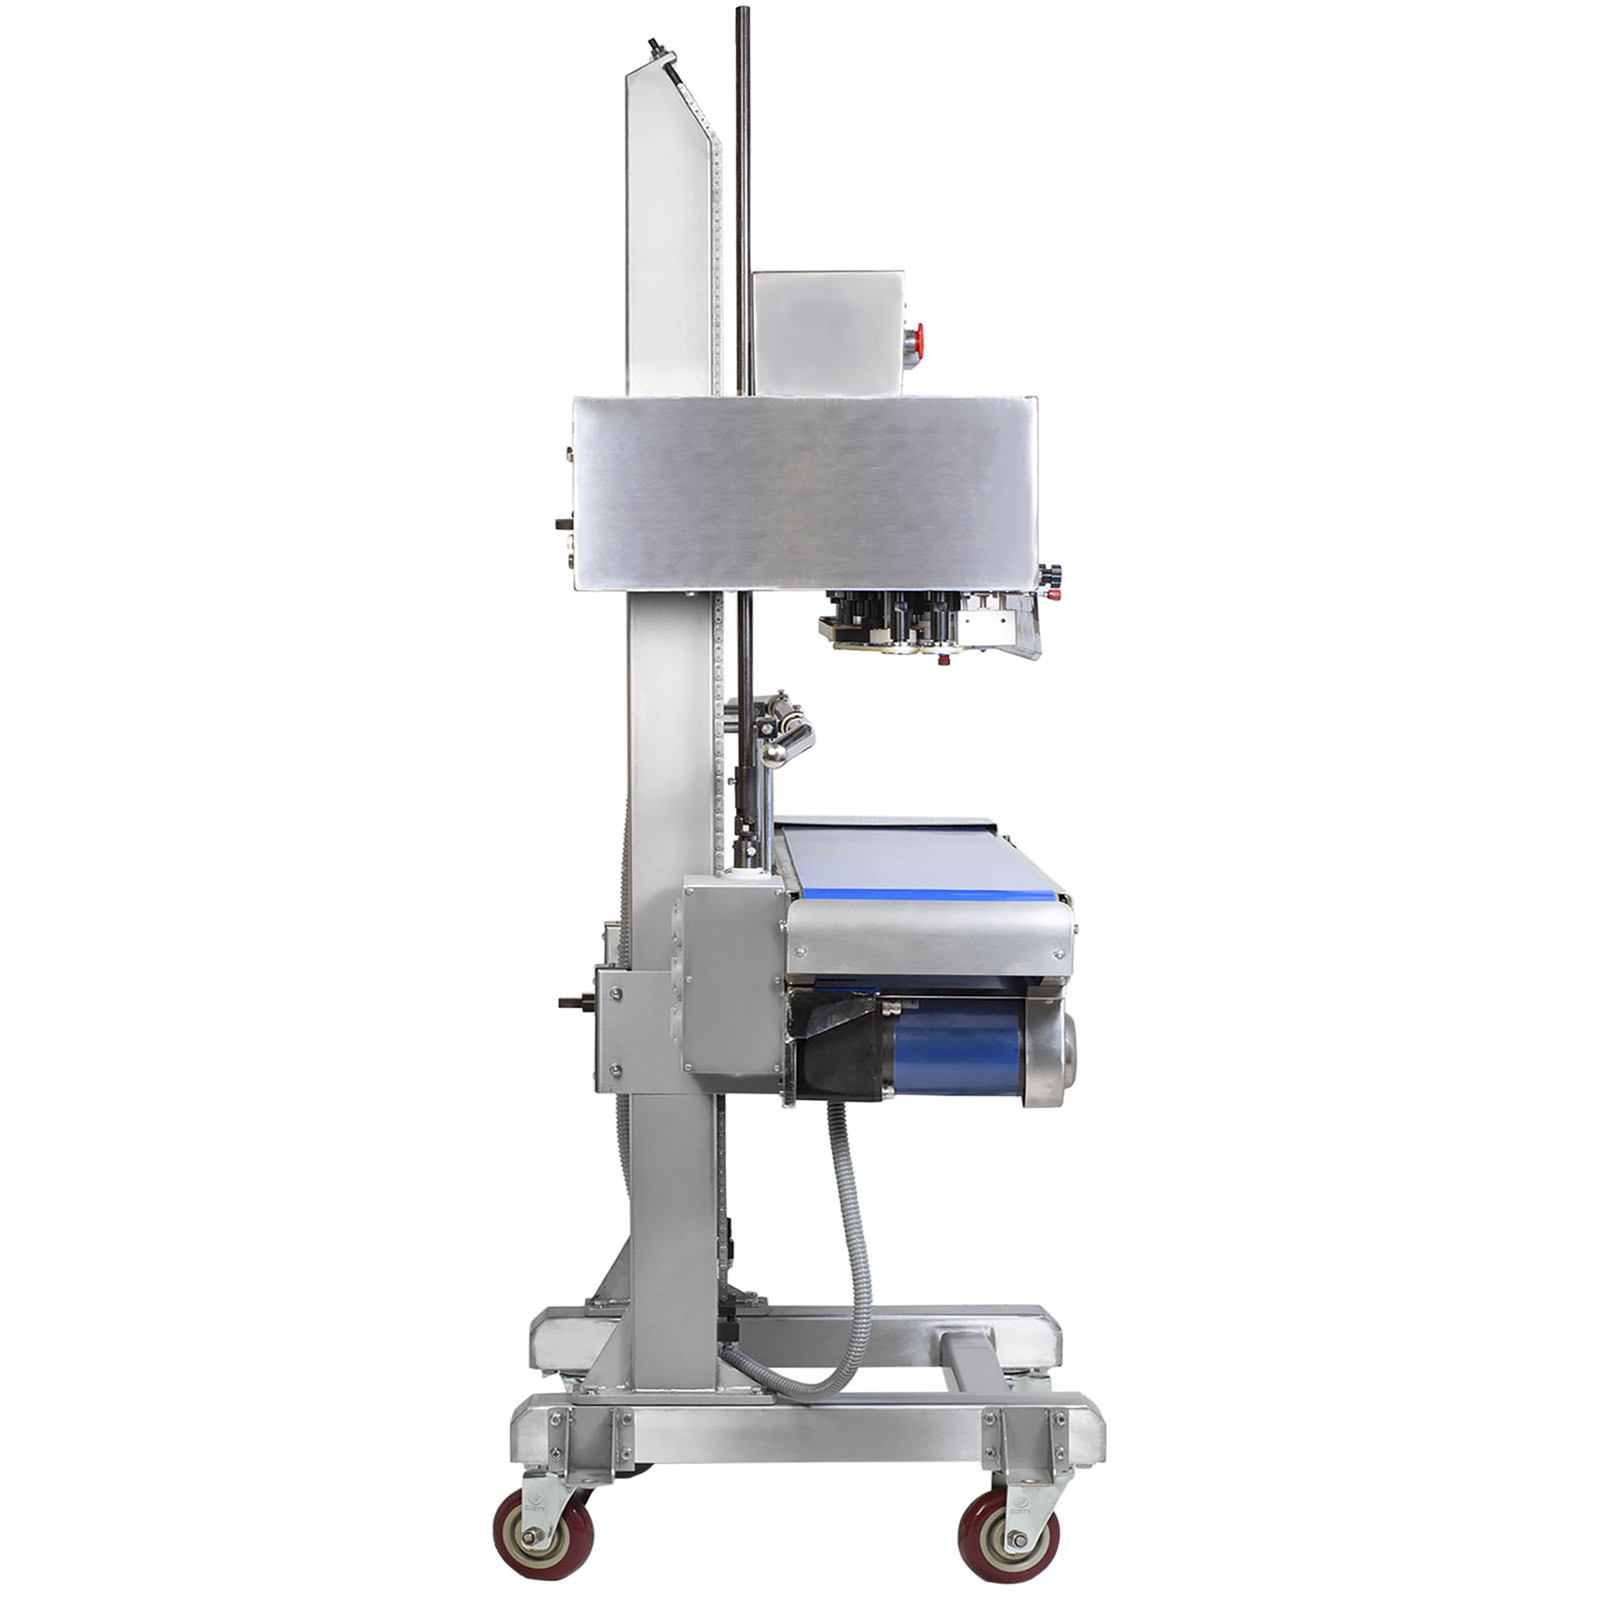 Side view of the JORES TECHNOLOGIES® stainless steel continuous band sealer with green revolving band and heavy duty wheels over white background. Also show the side where the bag is coded and the end of the sealing process